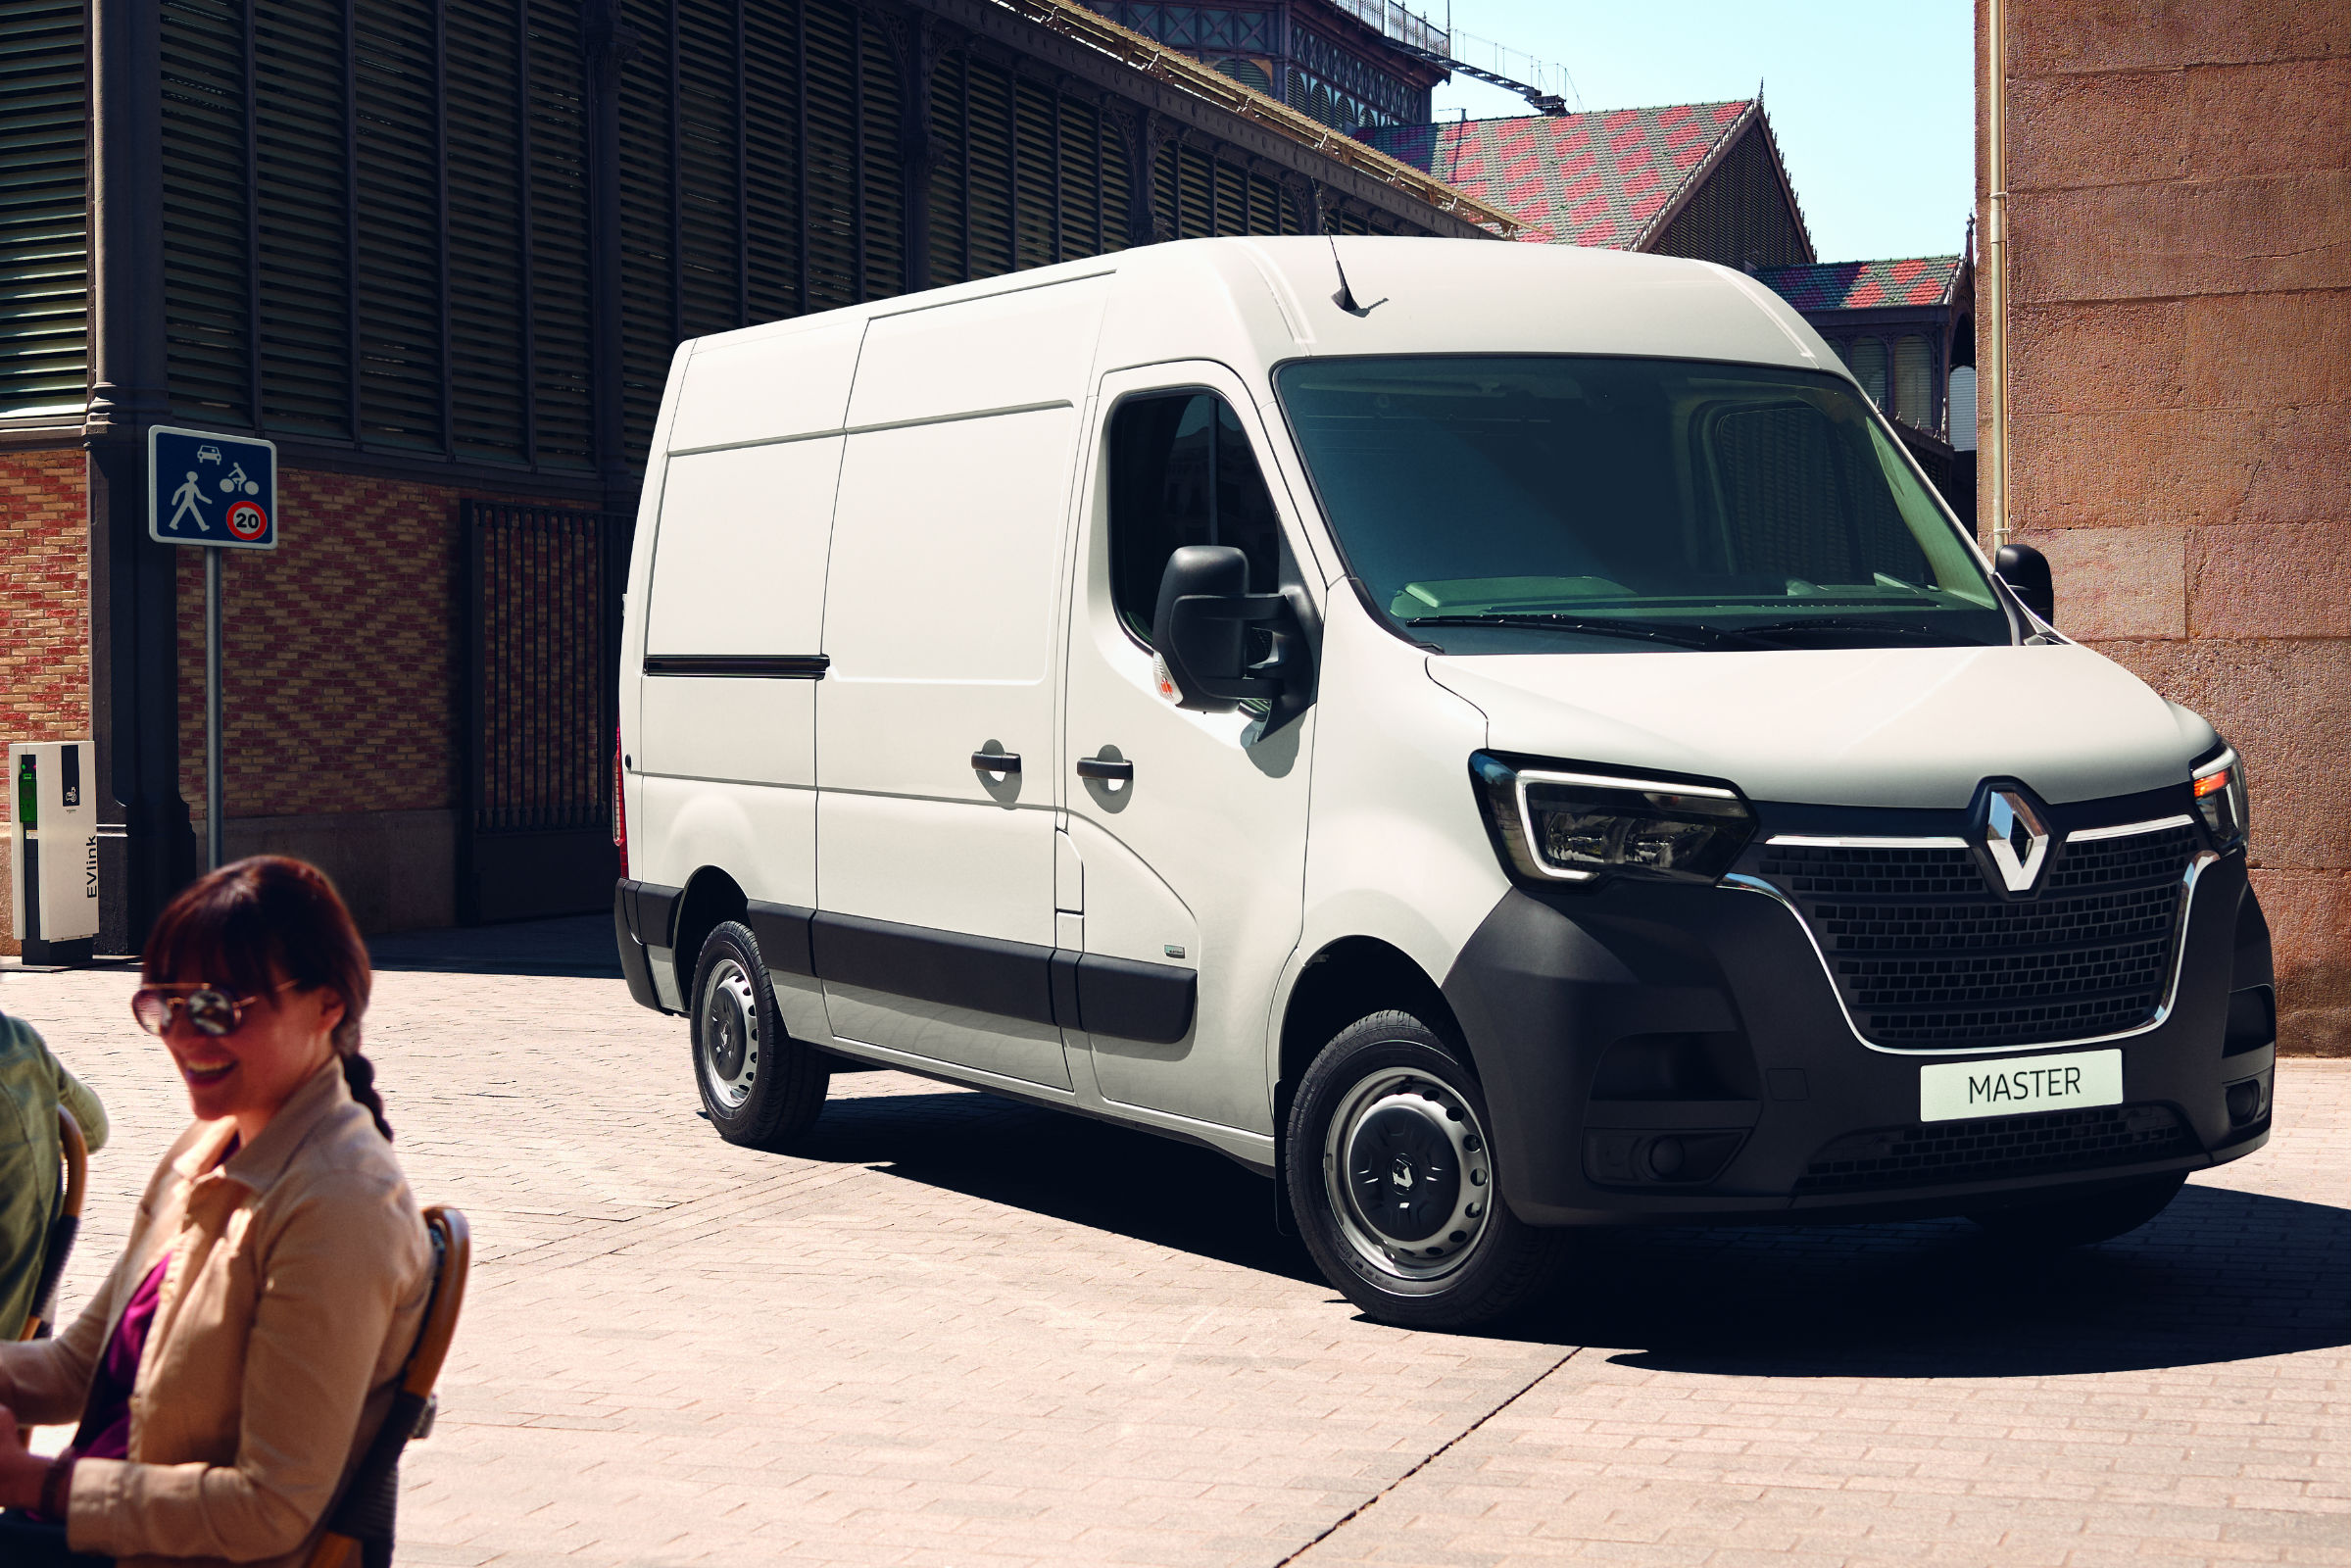 New 2019 Renault Master reveals all 